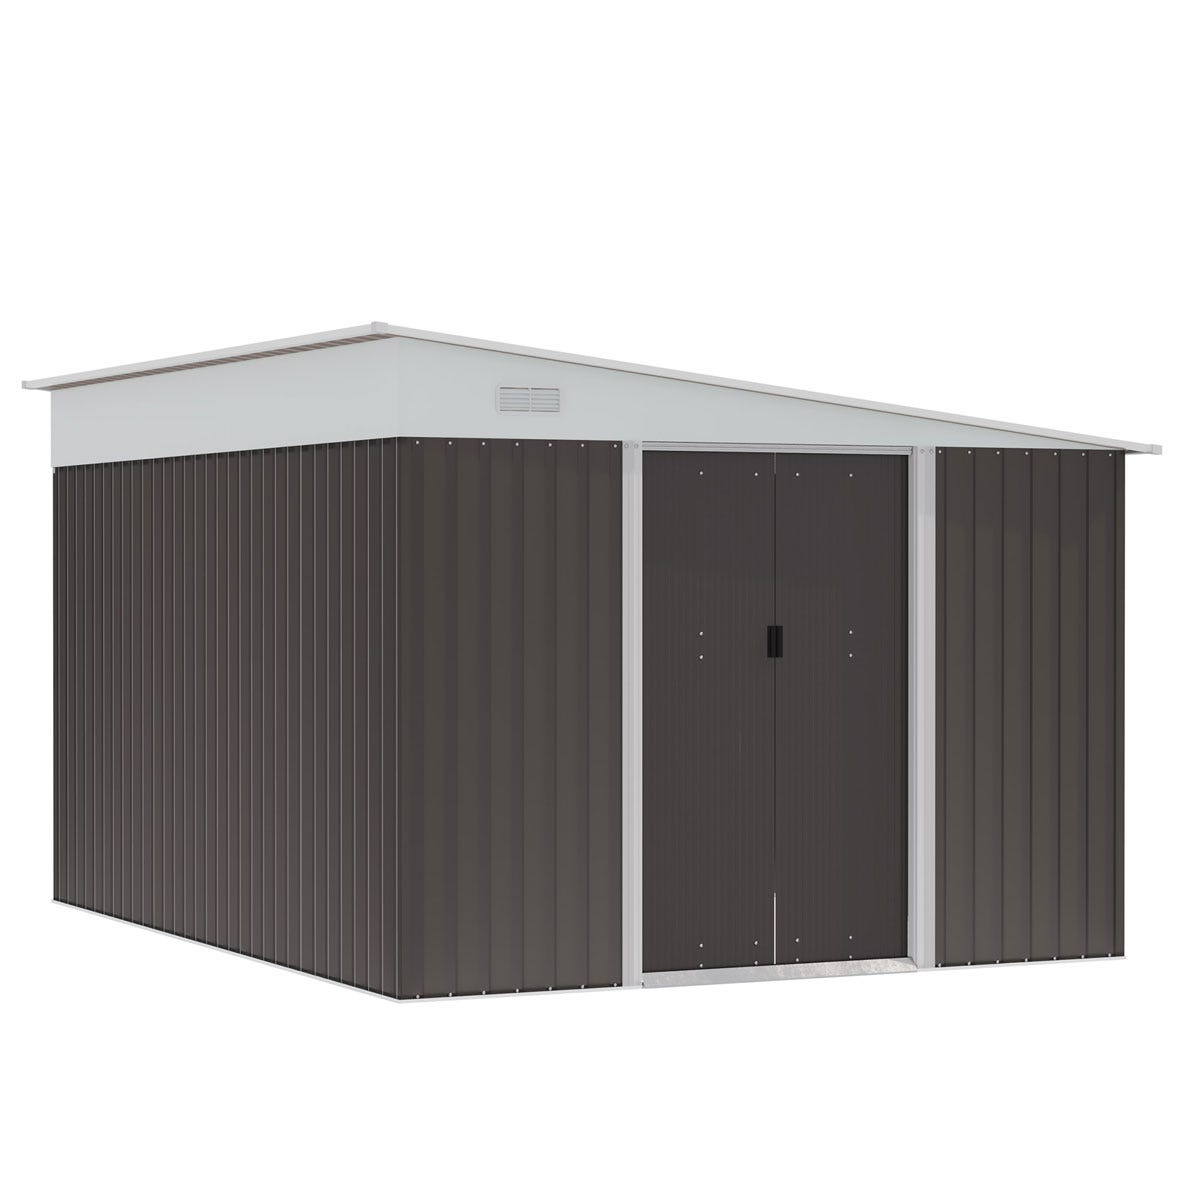 Outsunny 11 x 9ft Steel Garden Storage Shed w/ Sliding Doors and 2 Vents - Grey